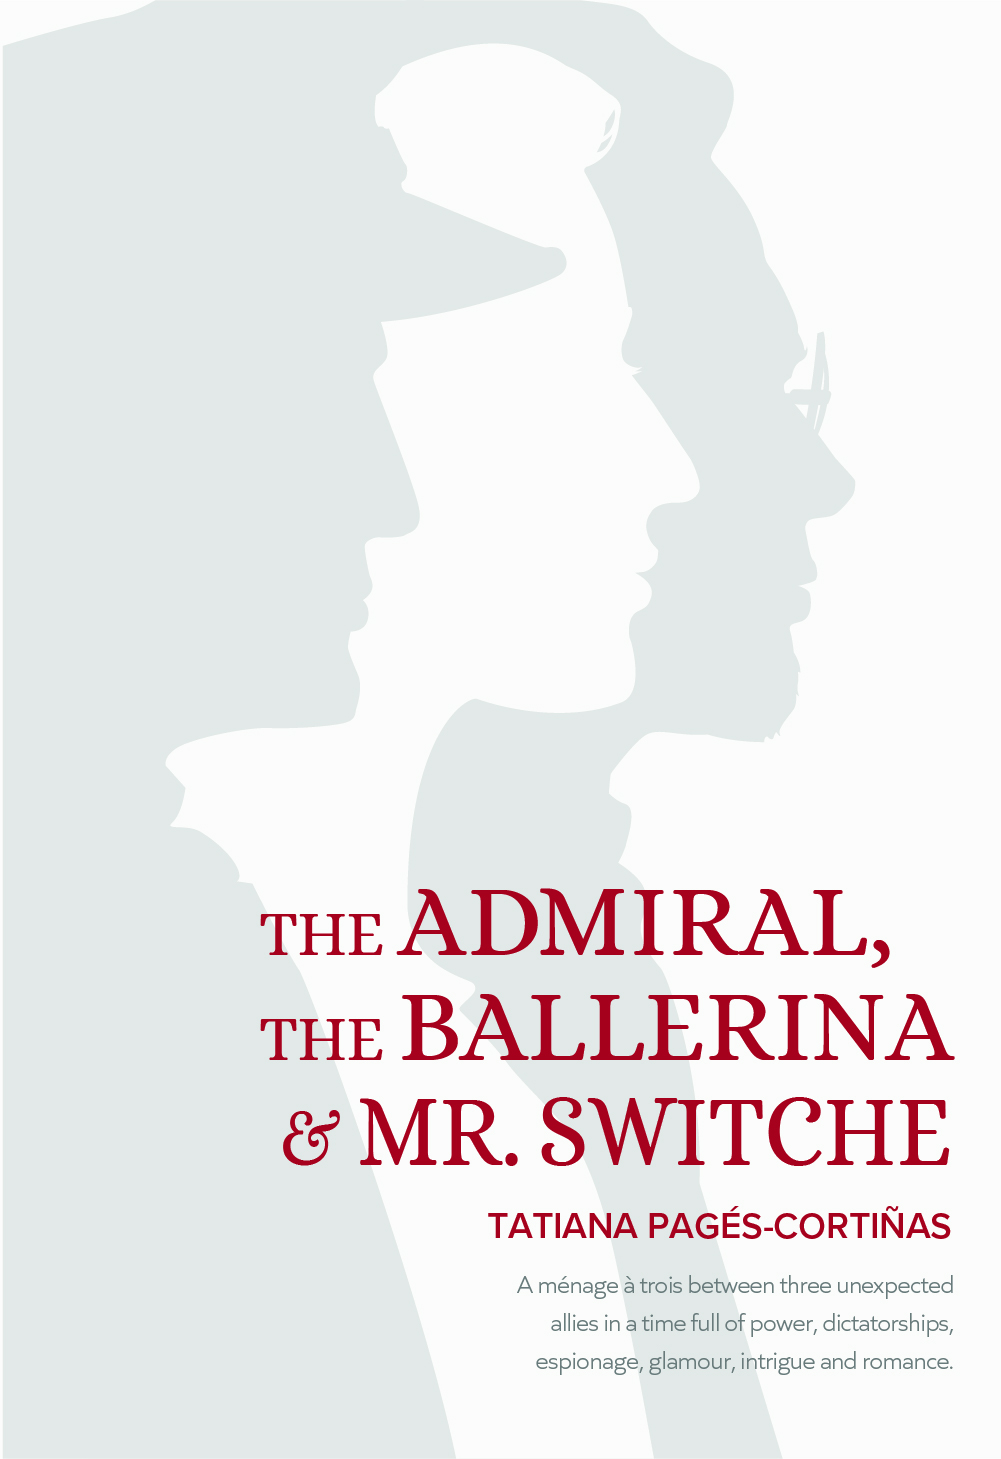 The Admiral, The Ballerina and Mr. Switche: A ménage a trois between three unexpected allies in a time full of power, dictatorships, espionage, glamour, intrigue and romance